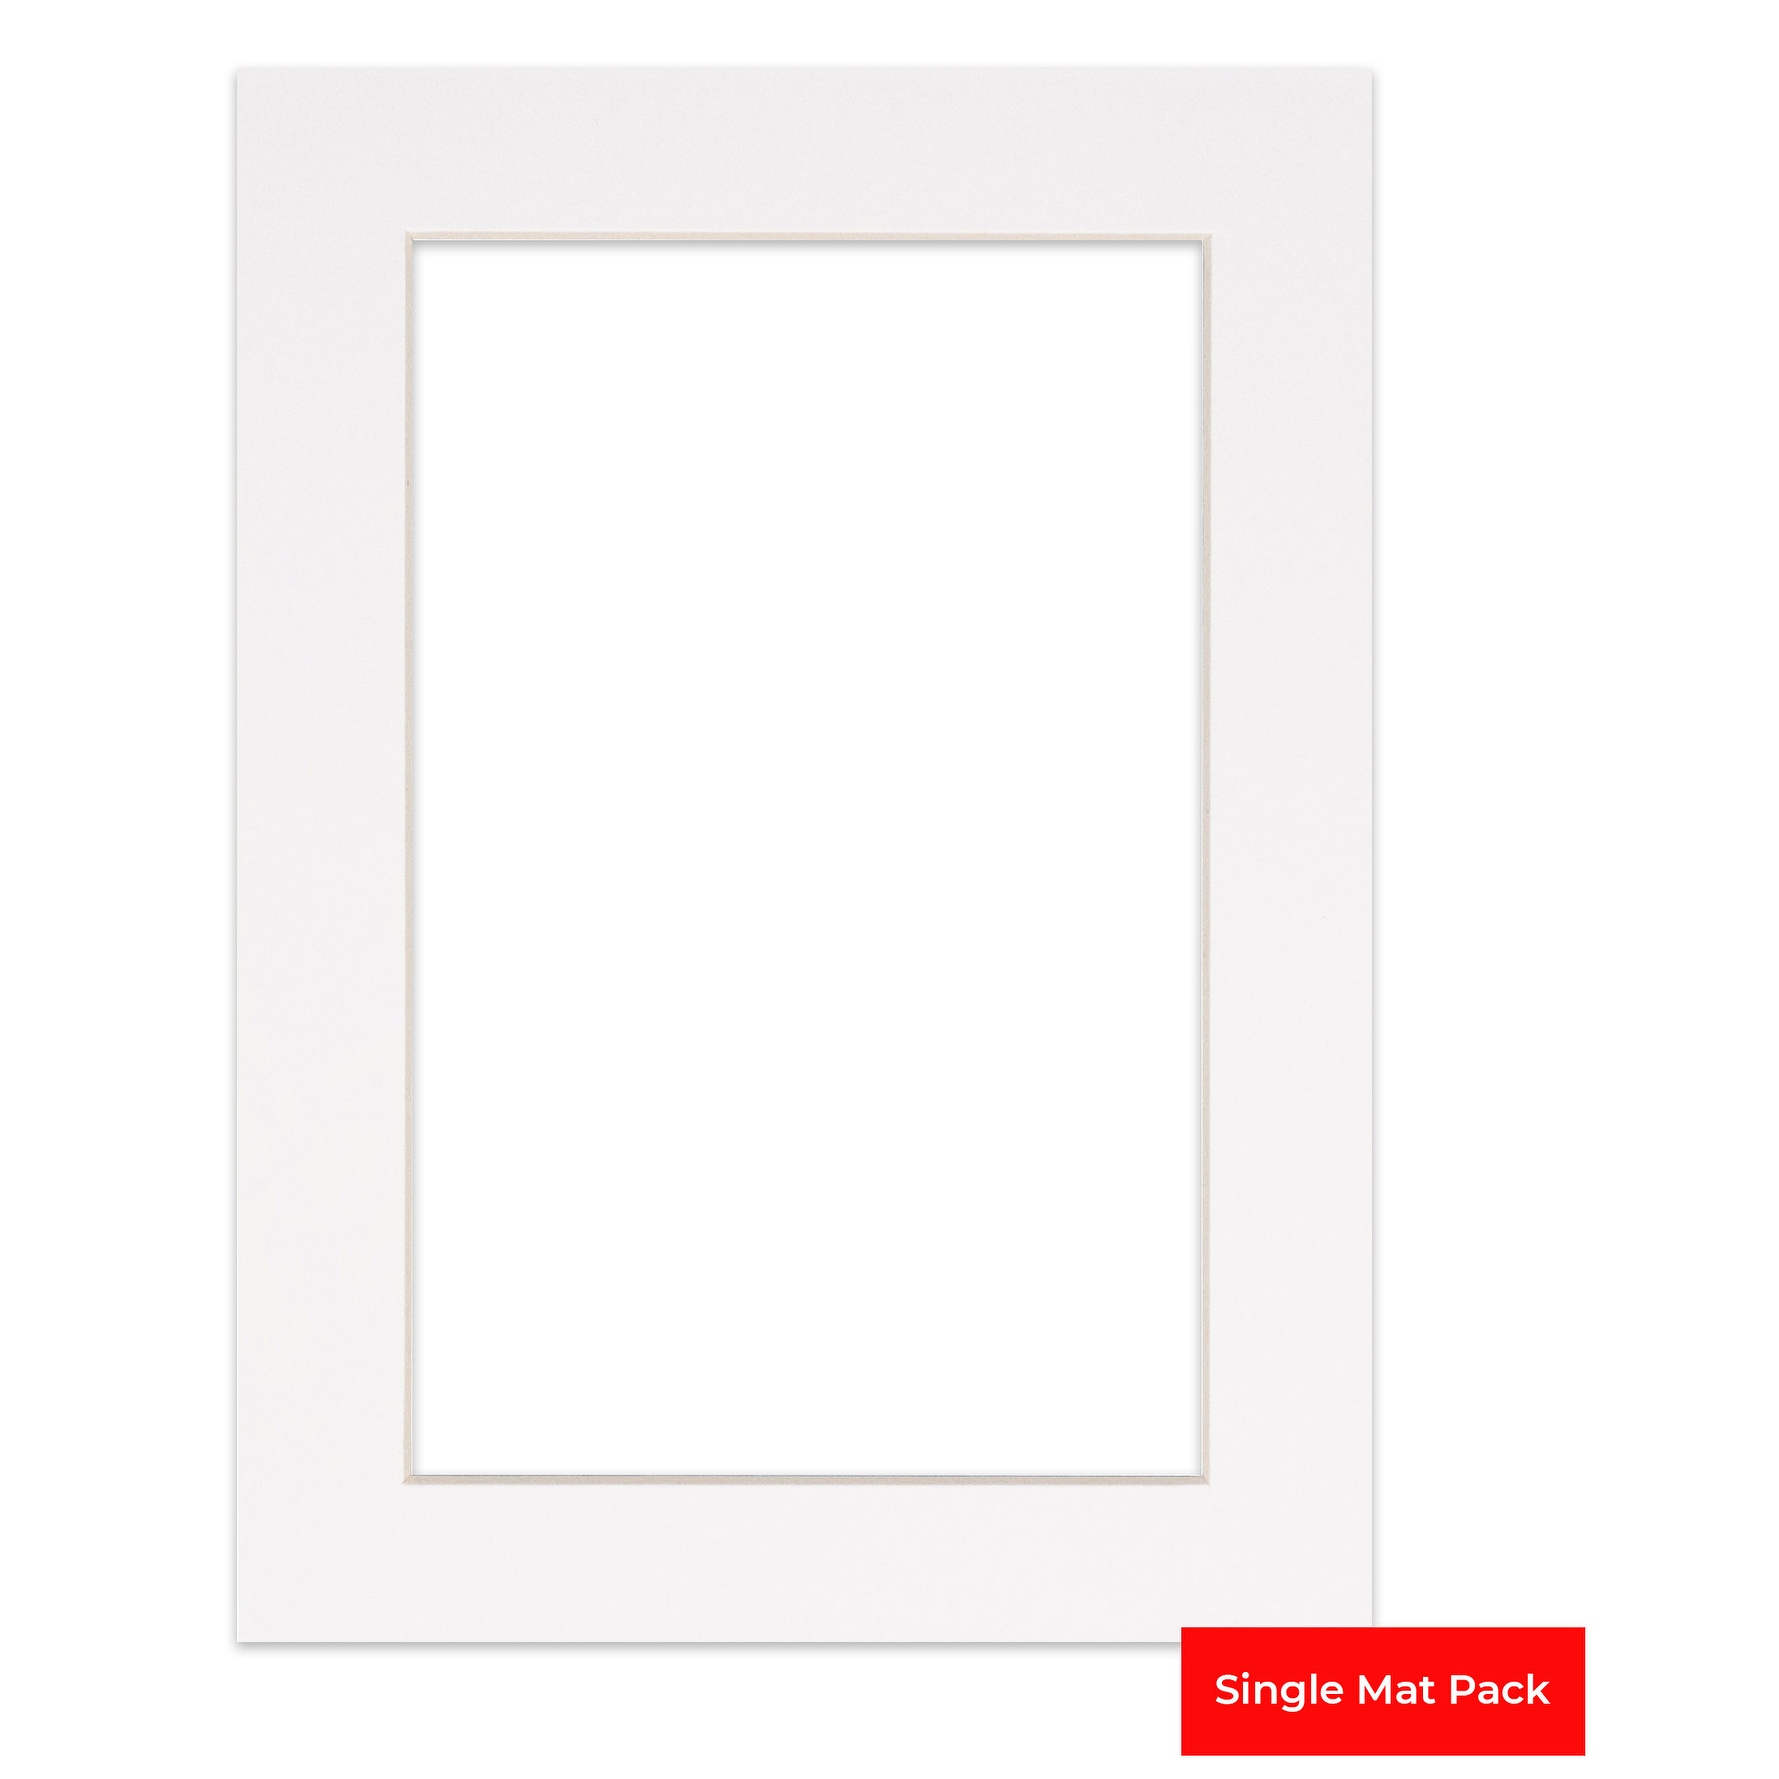 18x24 Mat Bevel Cut for 15x20 Photos - Acid Free White Precut Matboard - for Pictures, Photos, Framing